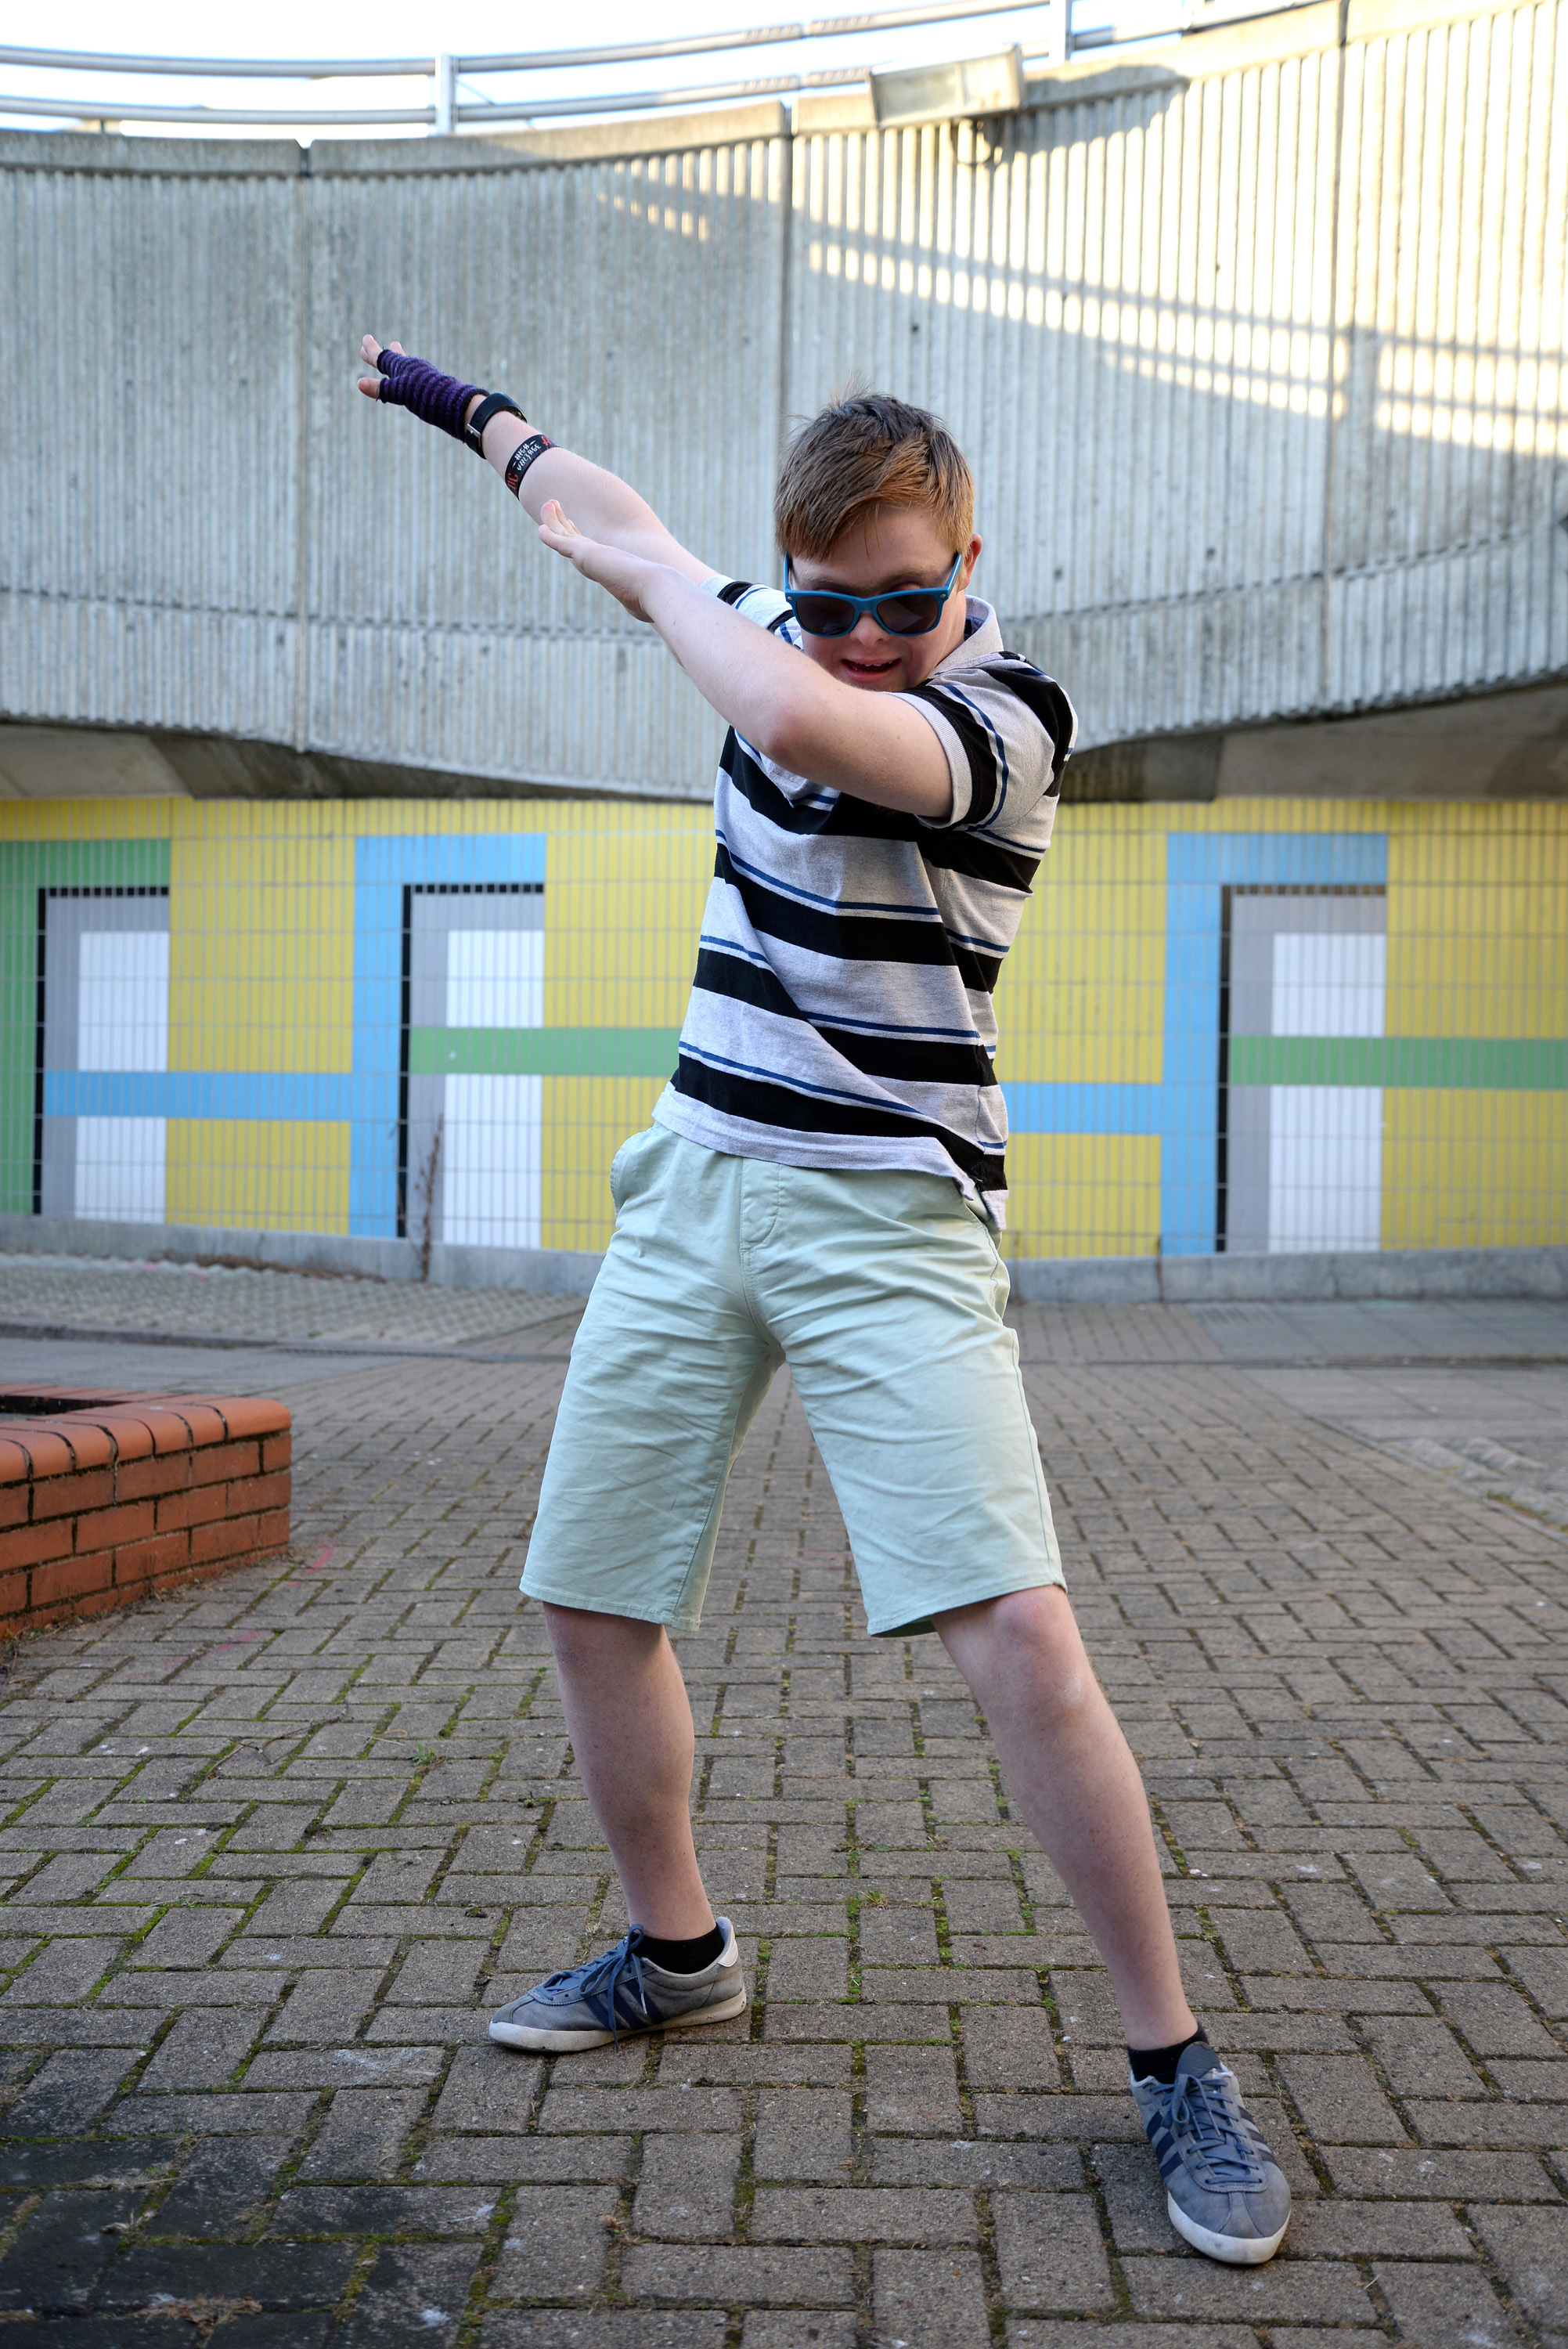 Photographer shortlisted for national award after taking snap of teenager dancing